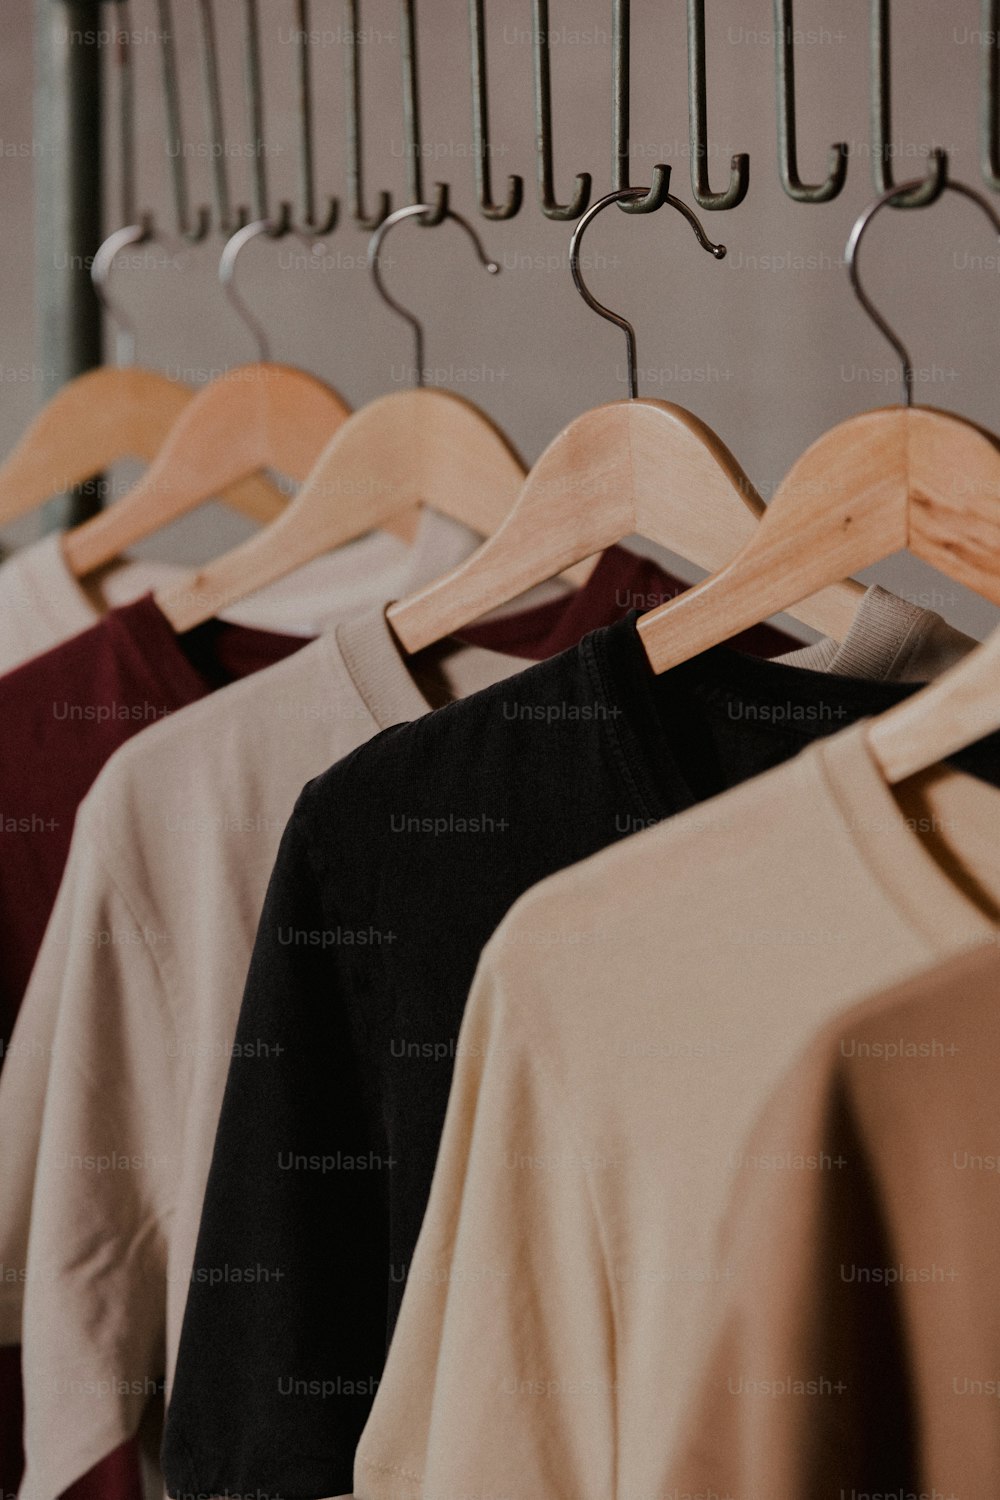 a row of shirts hanging on a rack